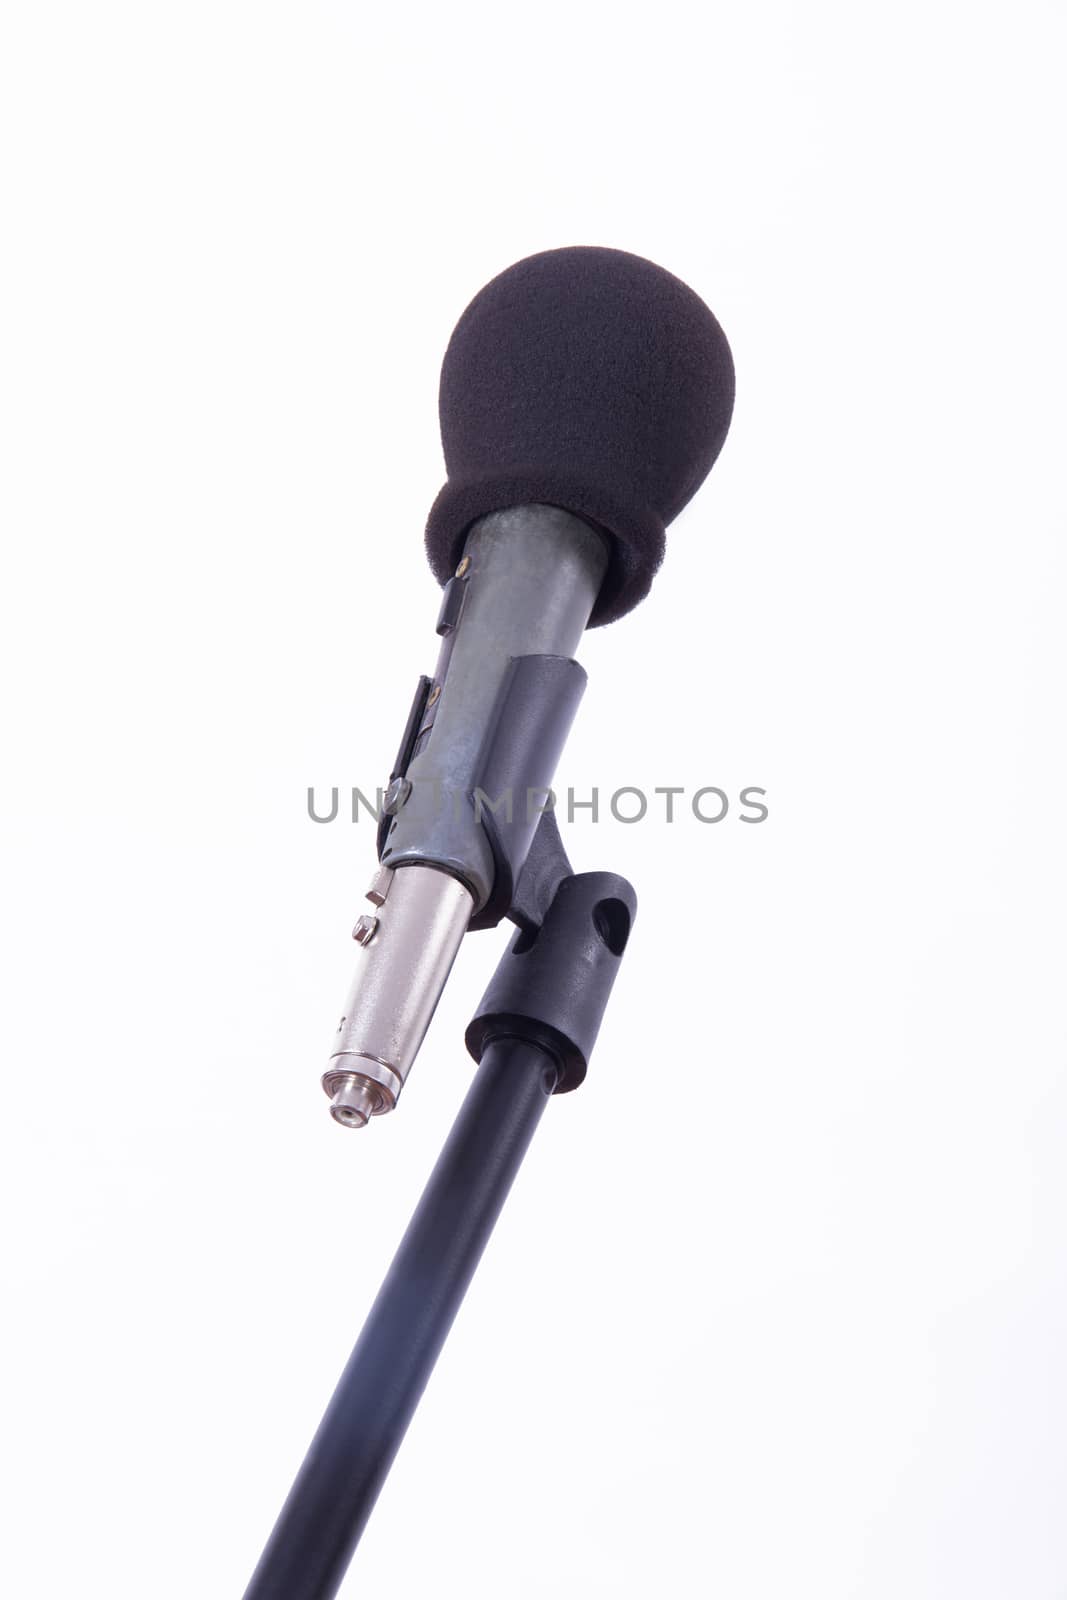 Black microphone on stand, isolated on white background.